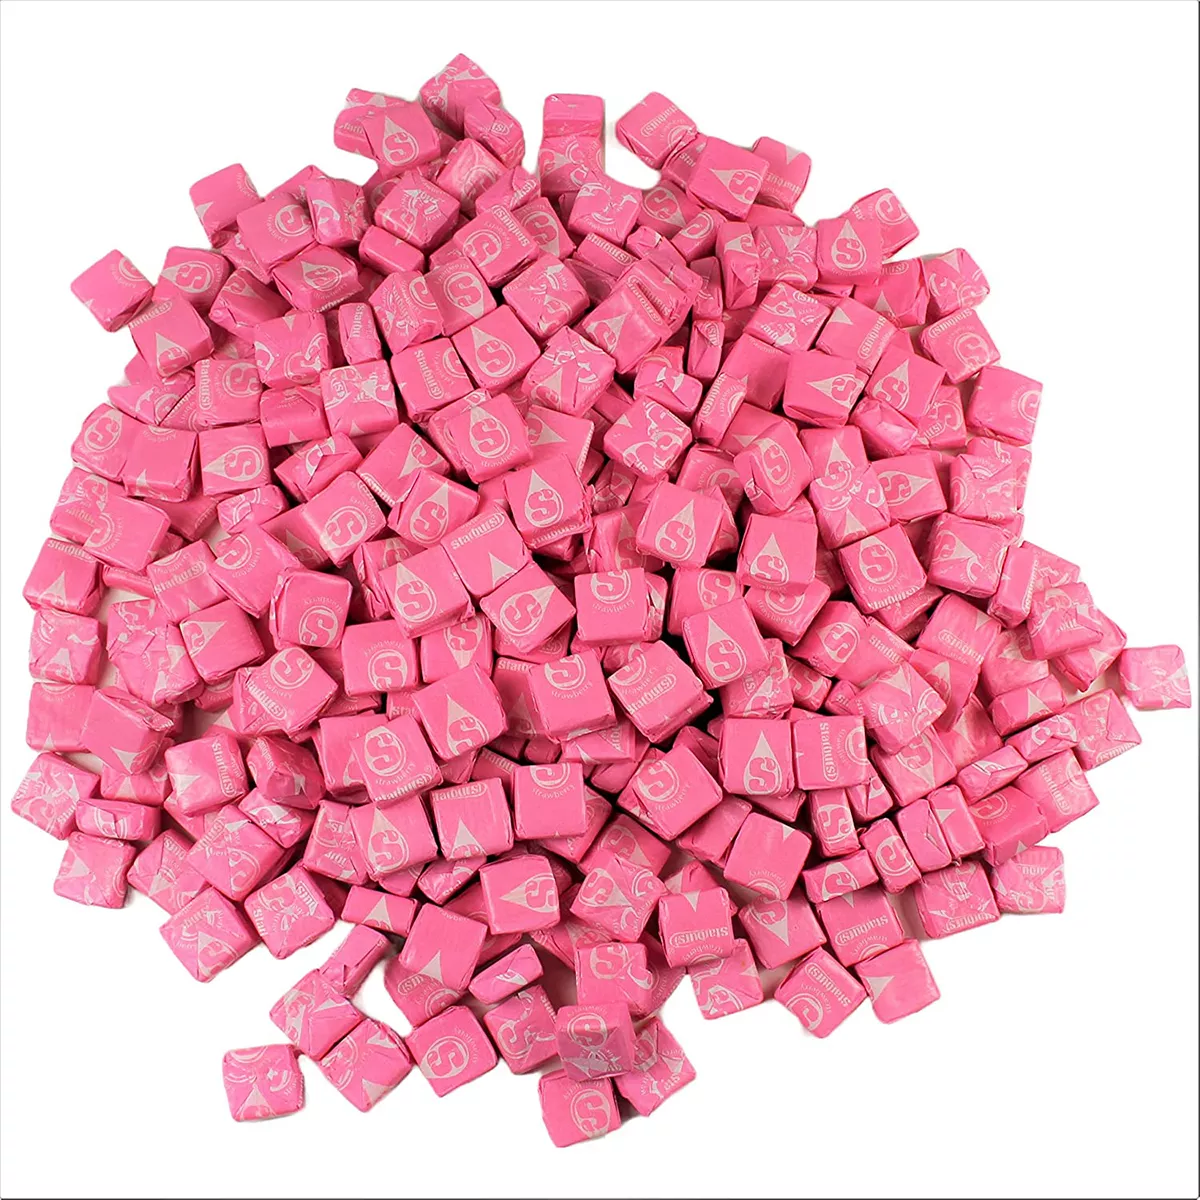 Star Puffz Pink: Strawberry Bliss for Sweet Cravings